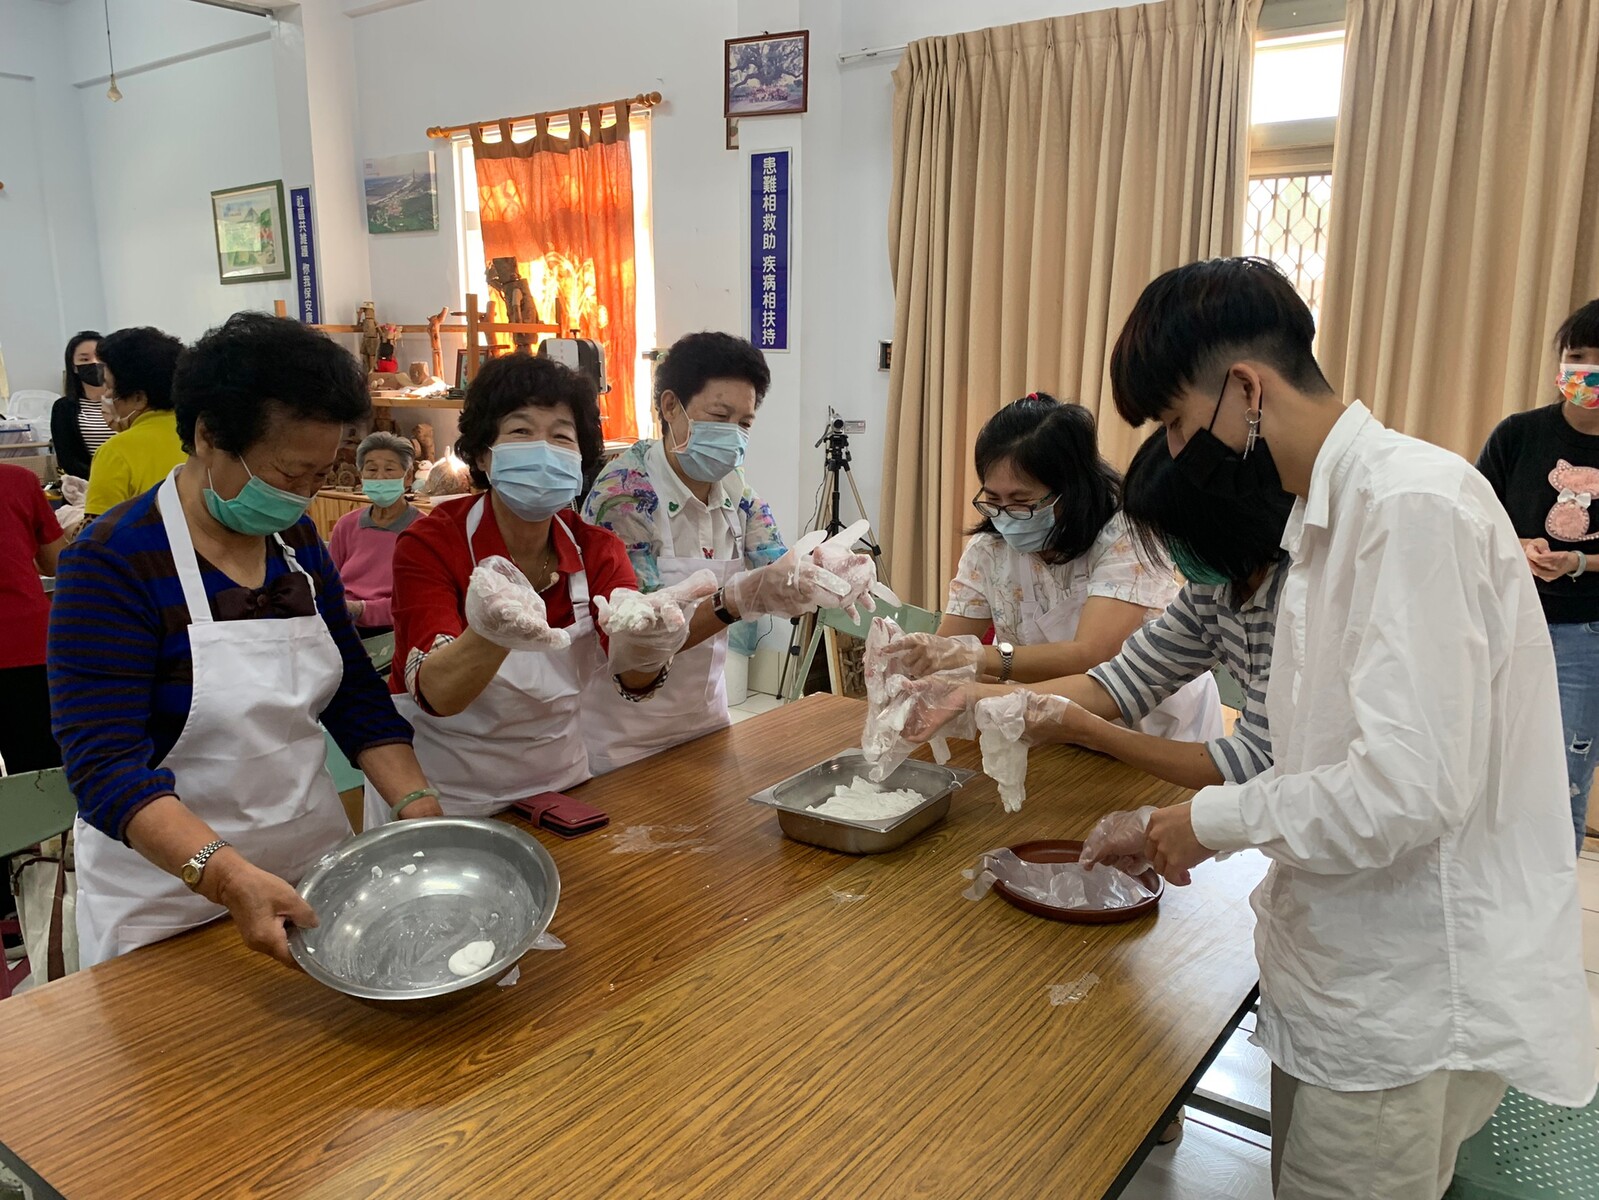 Students of the Institute of Public Affairs Management wrapping mochi together with community elders.